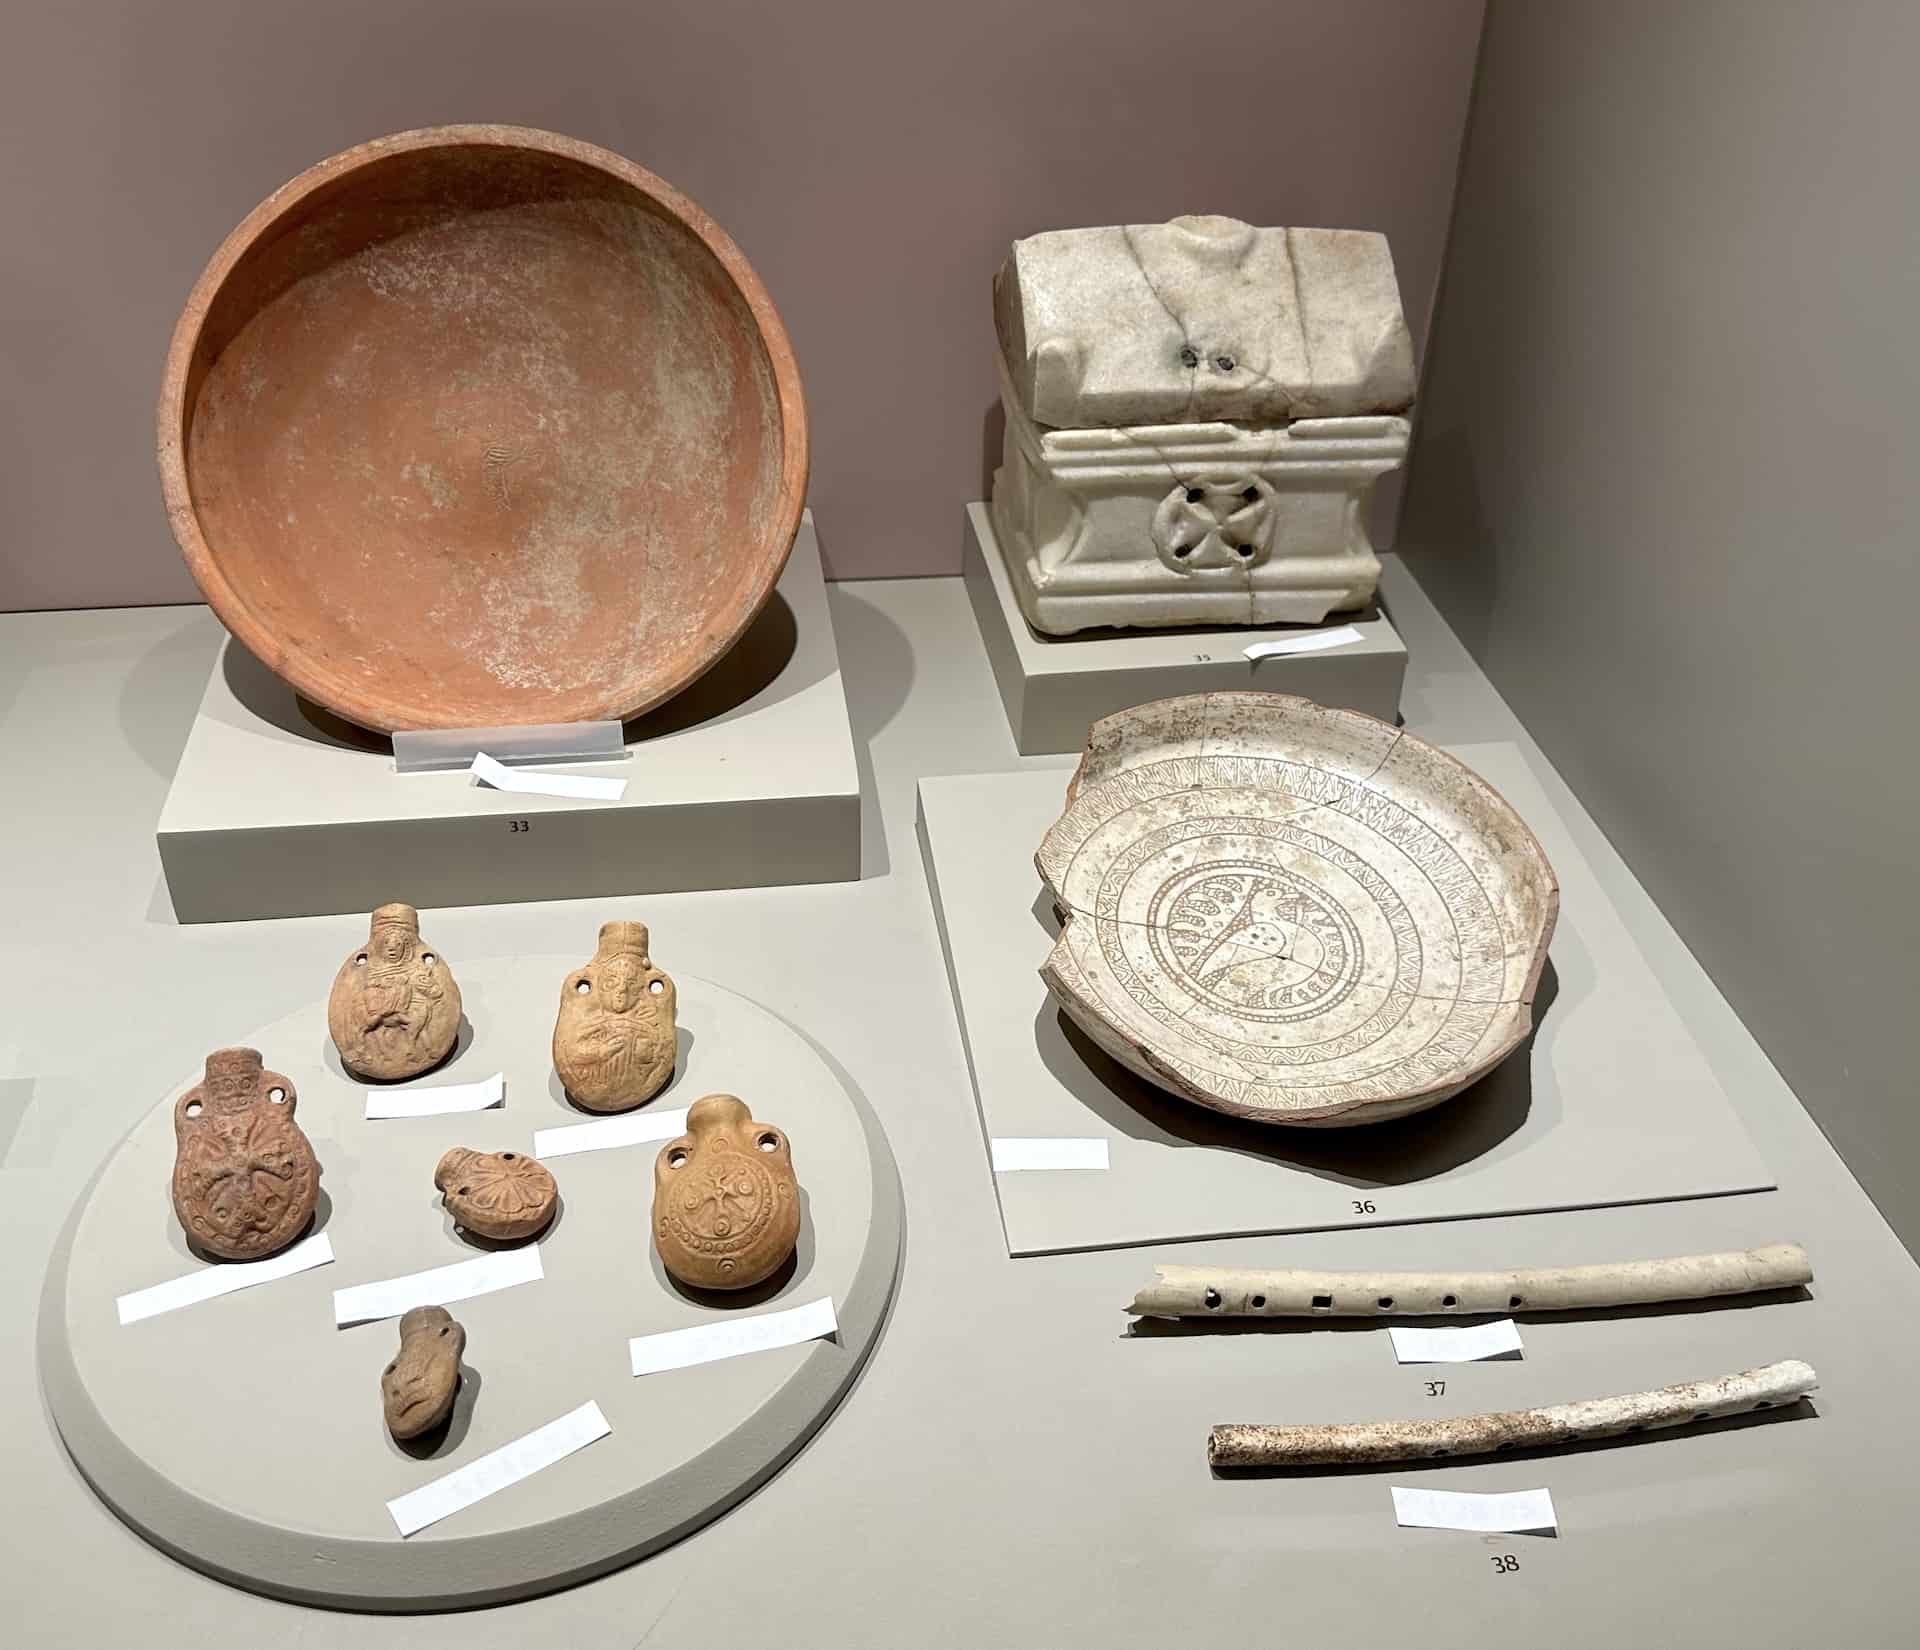 Bowls, ossuary, and instruments (3rd to 7th century) in Ephesus Through the Ages